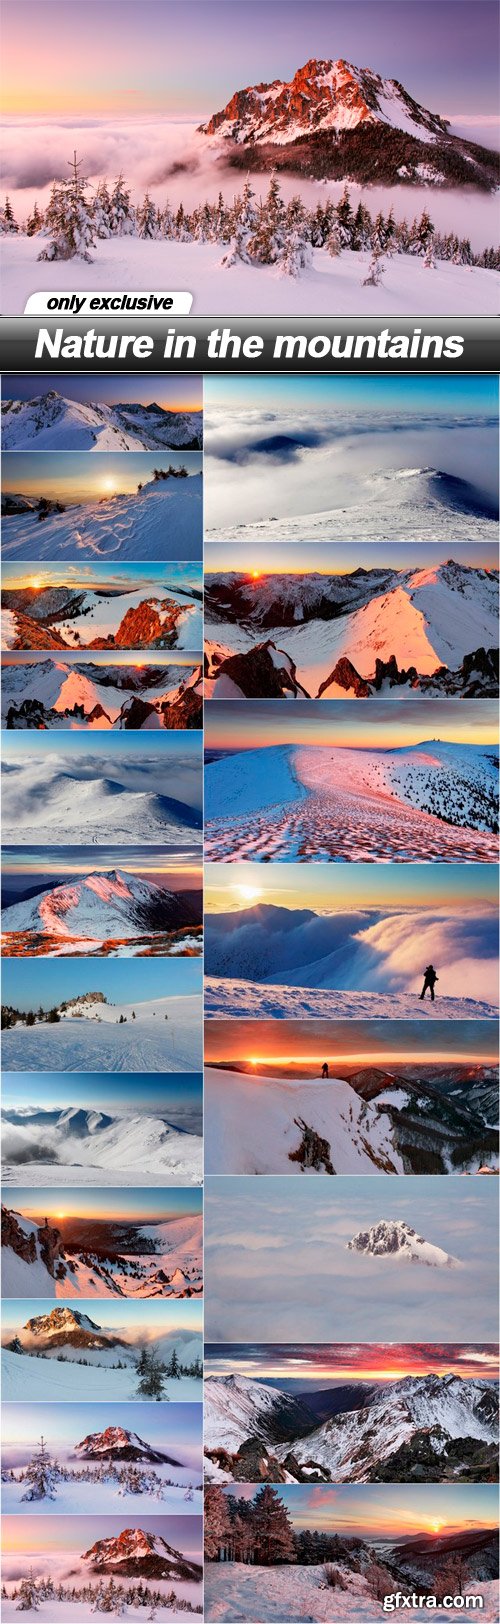 Nature in the mountains - 20 UHQ JPEG